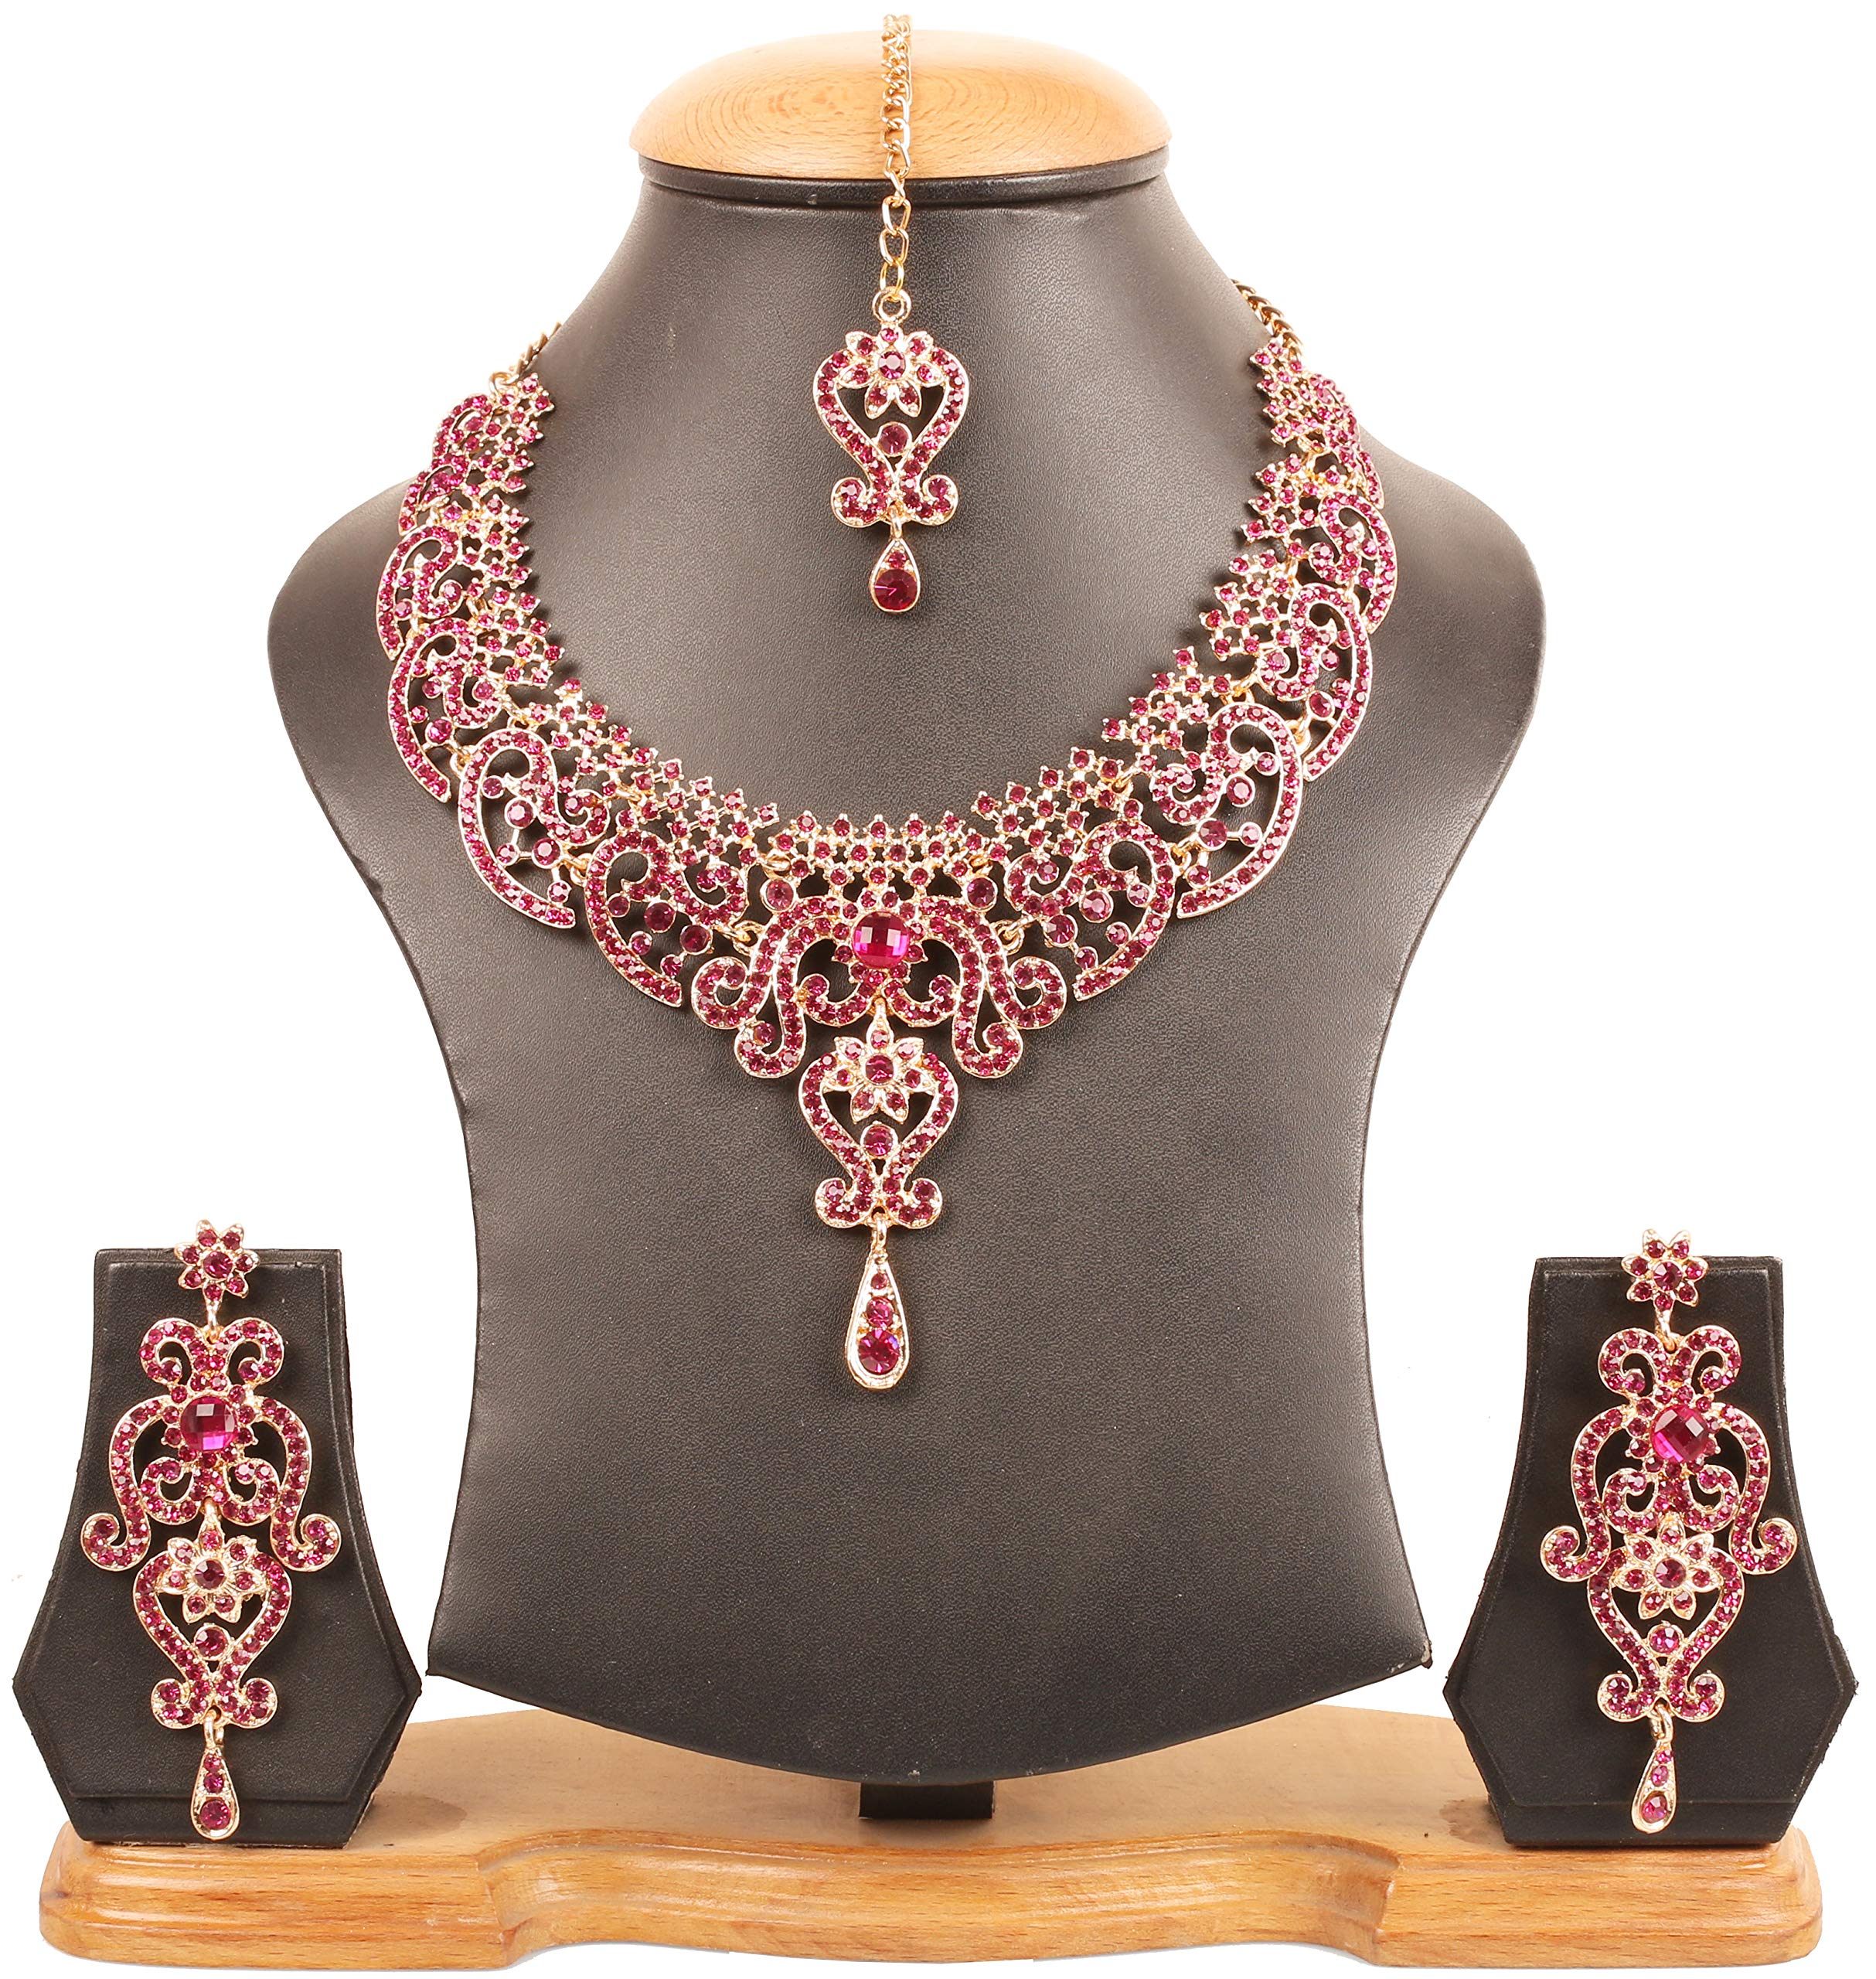 Touchstone Indian Bollywood Gorgeous intricate Workmanship Sparkling White Colorful Rhinestone crystal wedding Designer Jewelry Necklace Set In Gold or Silver Tone For Women.